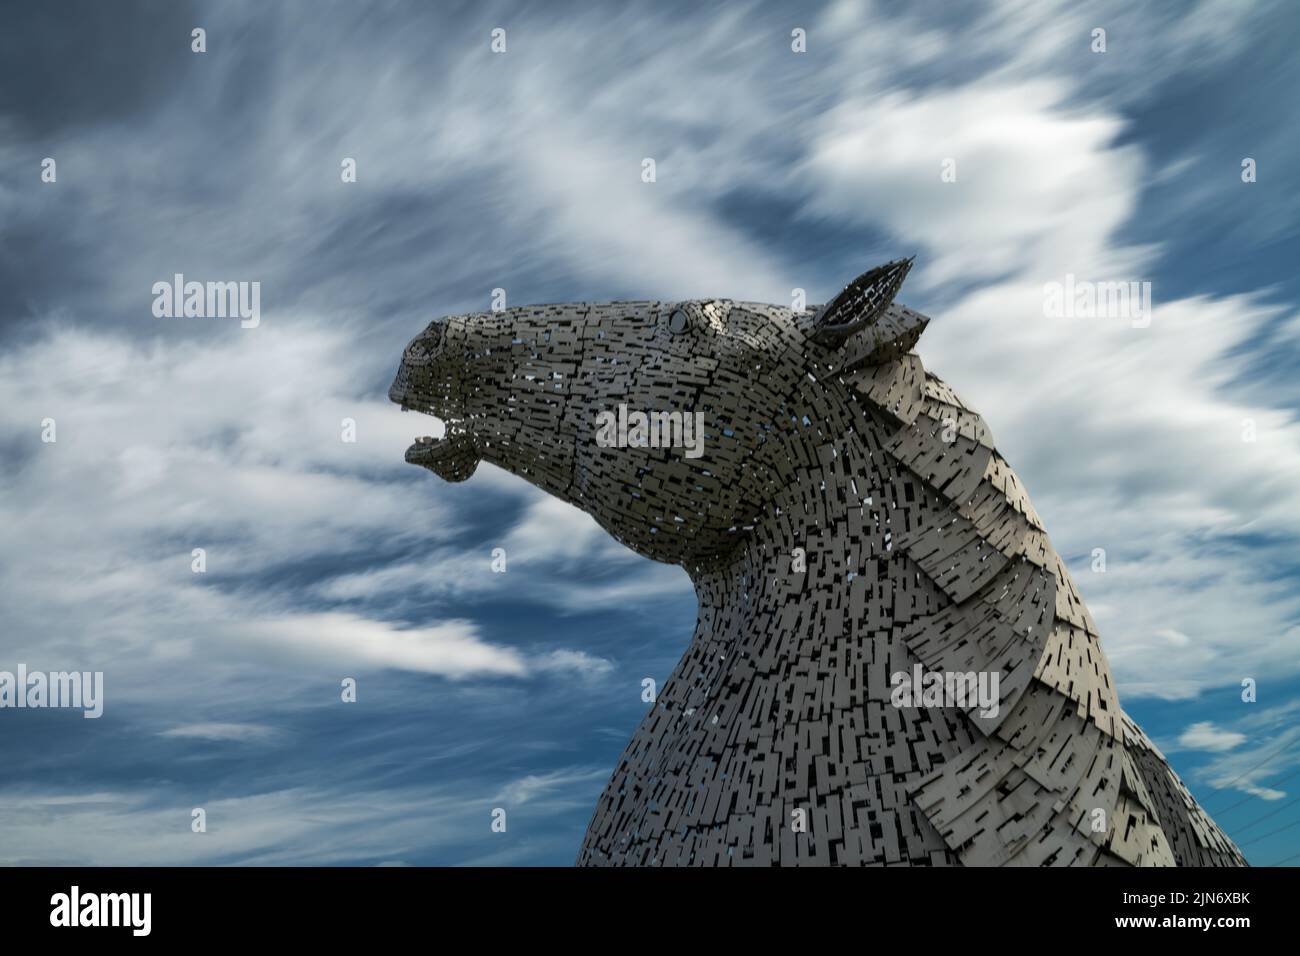 Falkirk, United Kingdom - 20 June, 2022: one of the Kelpies horse head sculptures with an expressive long exposure sky behind Stock Photo